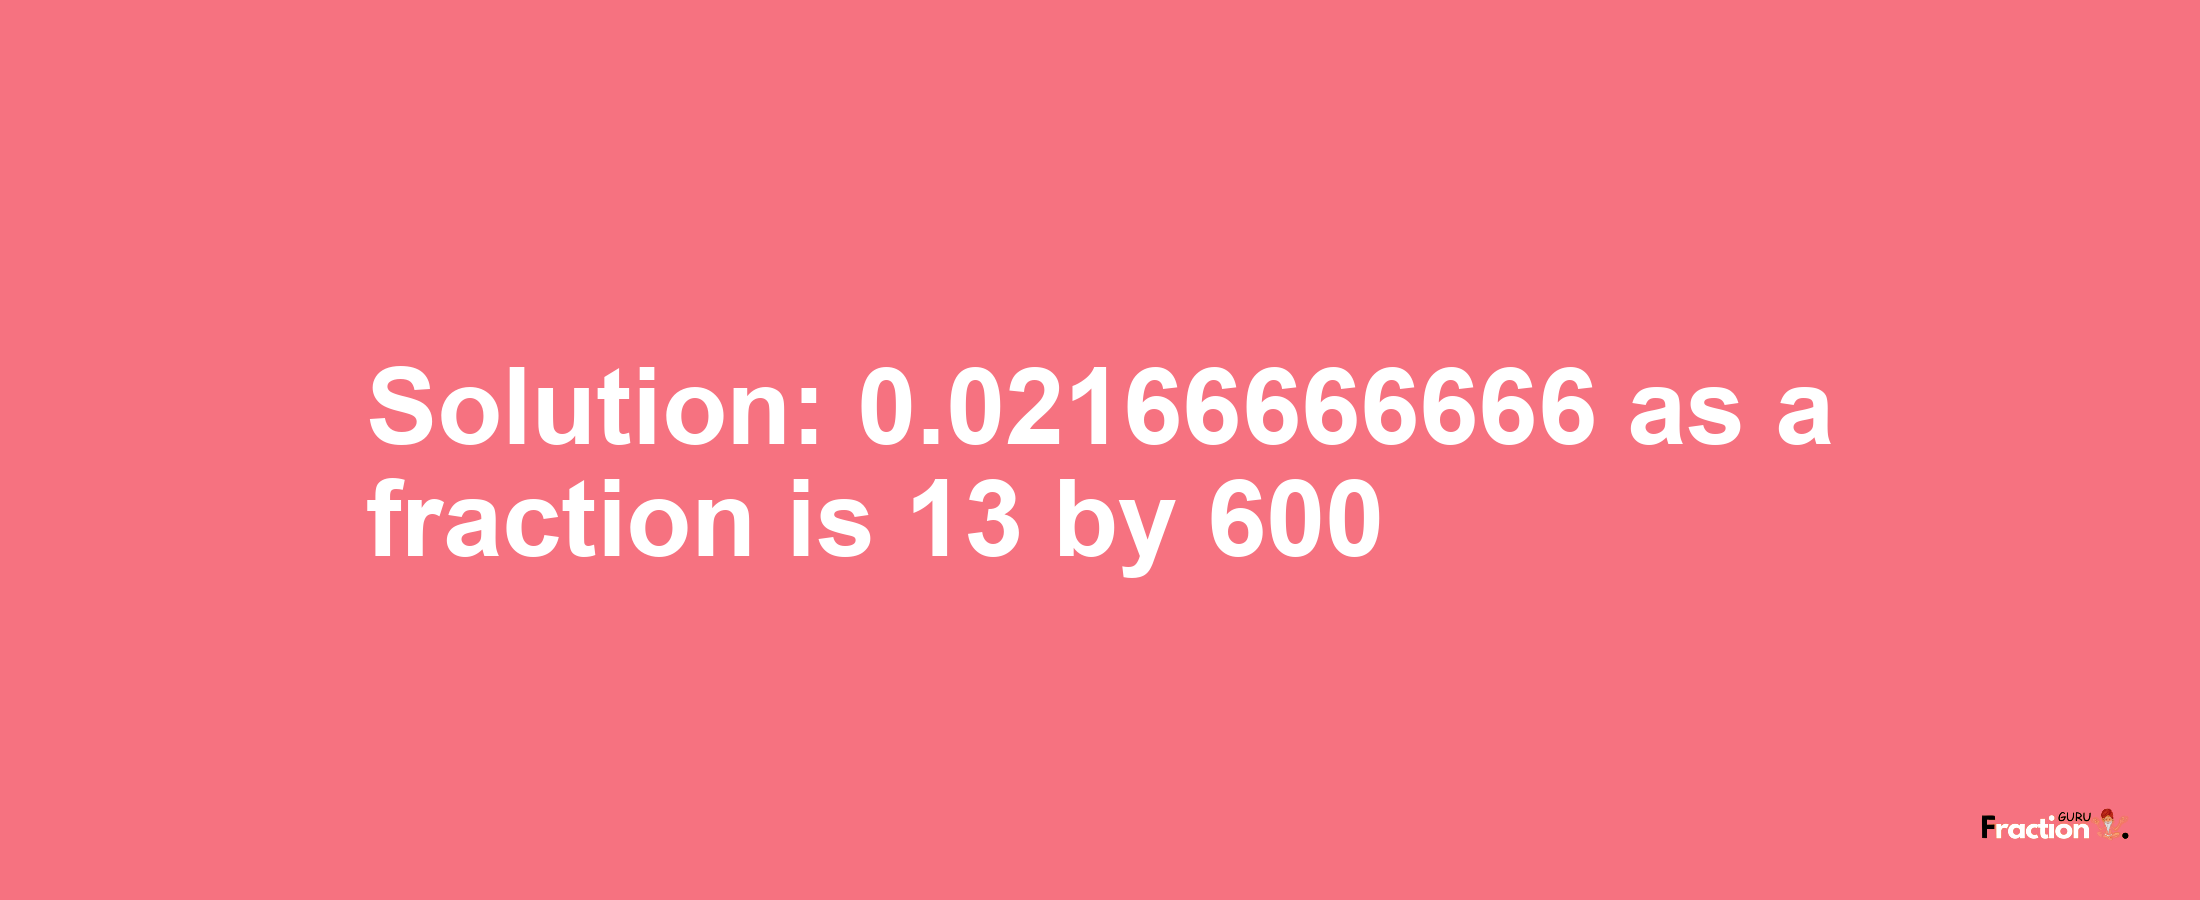 Solution:0.02166666666 as a fraction is 13/600